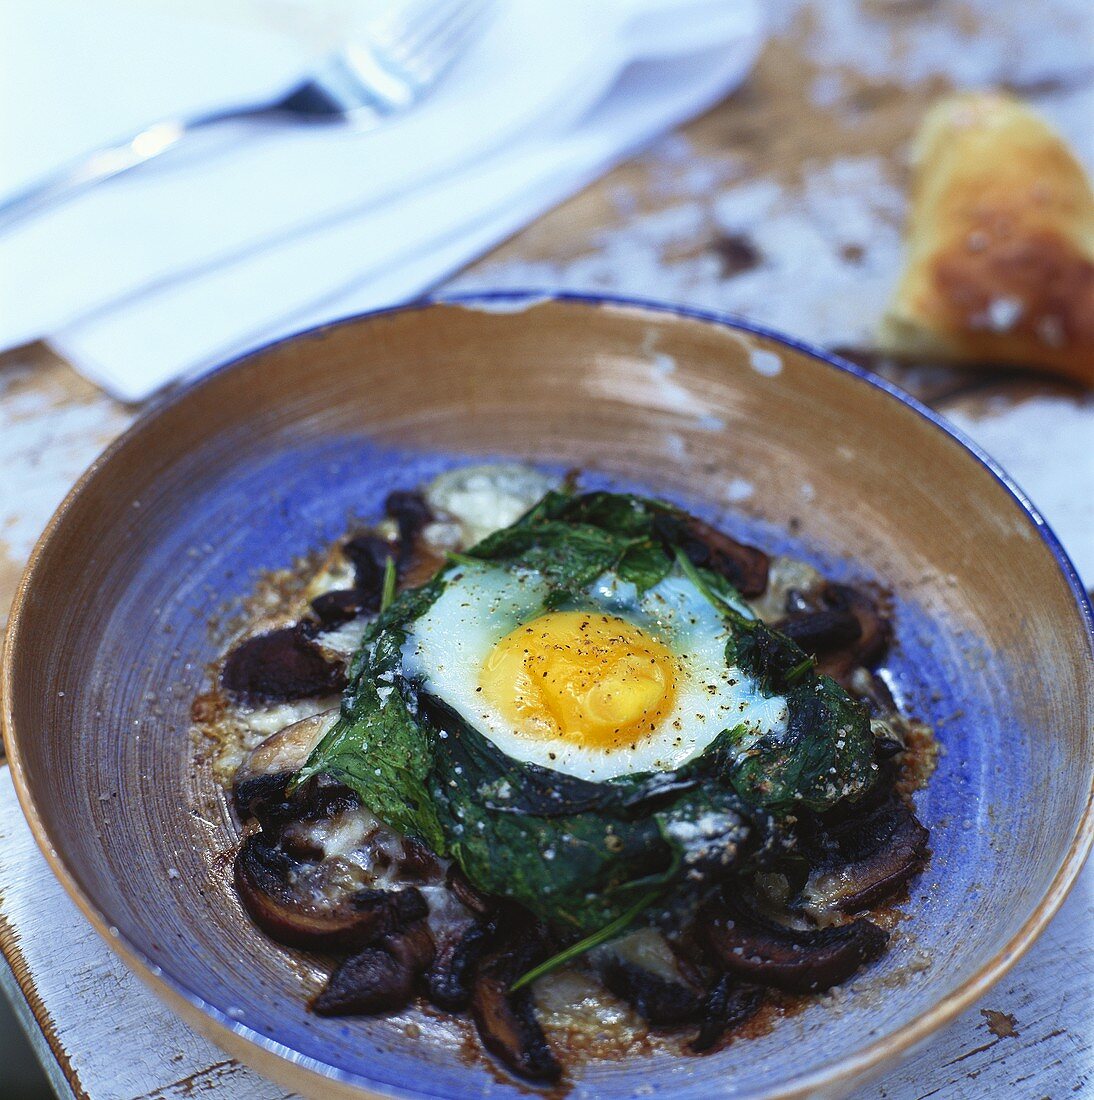 Fried egg with spinach, mushrooms and Cheddar cheese